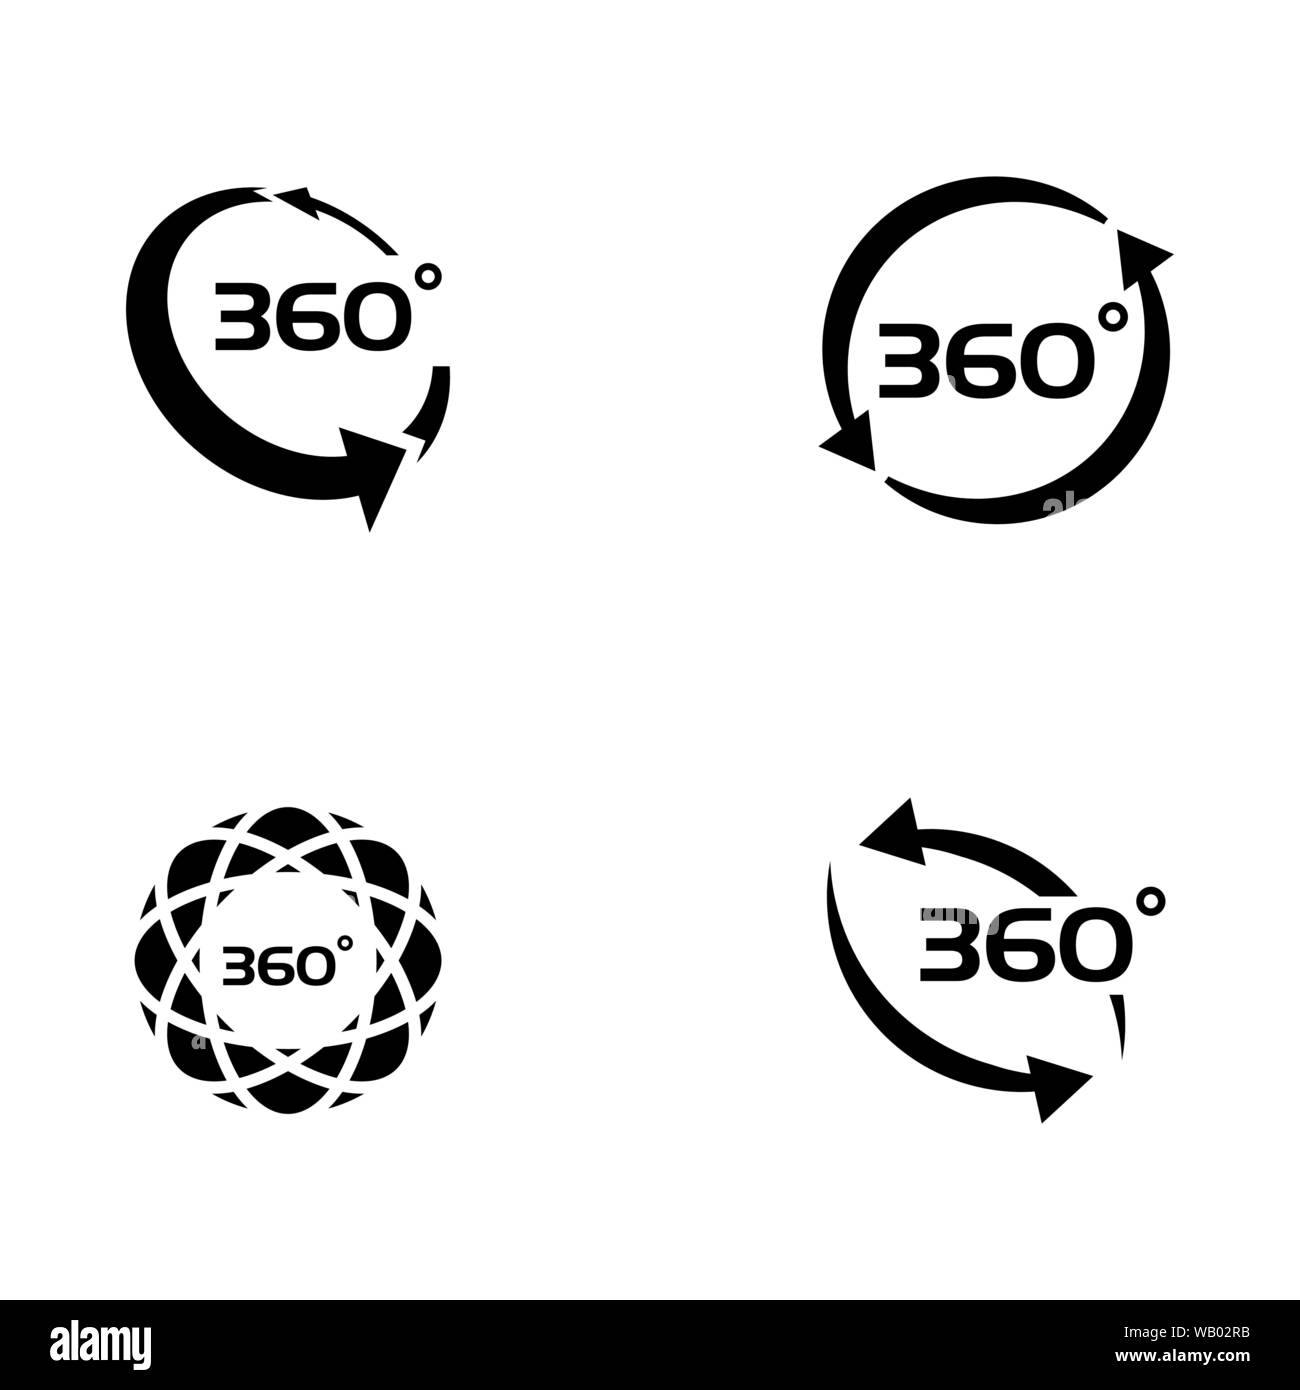 360 Degree View Related Vector Icons design template Stock Vector